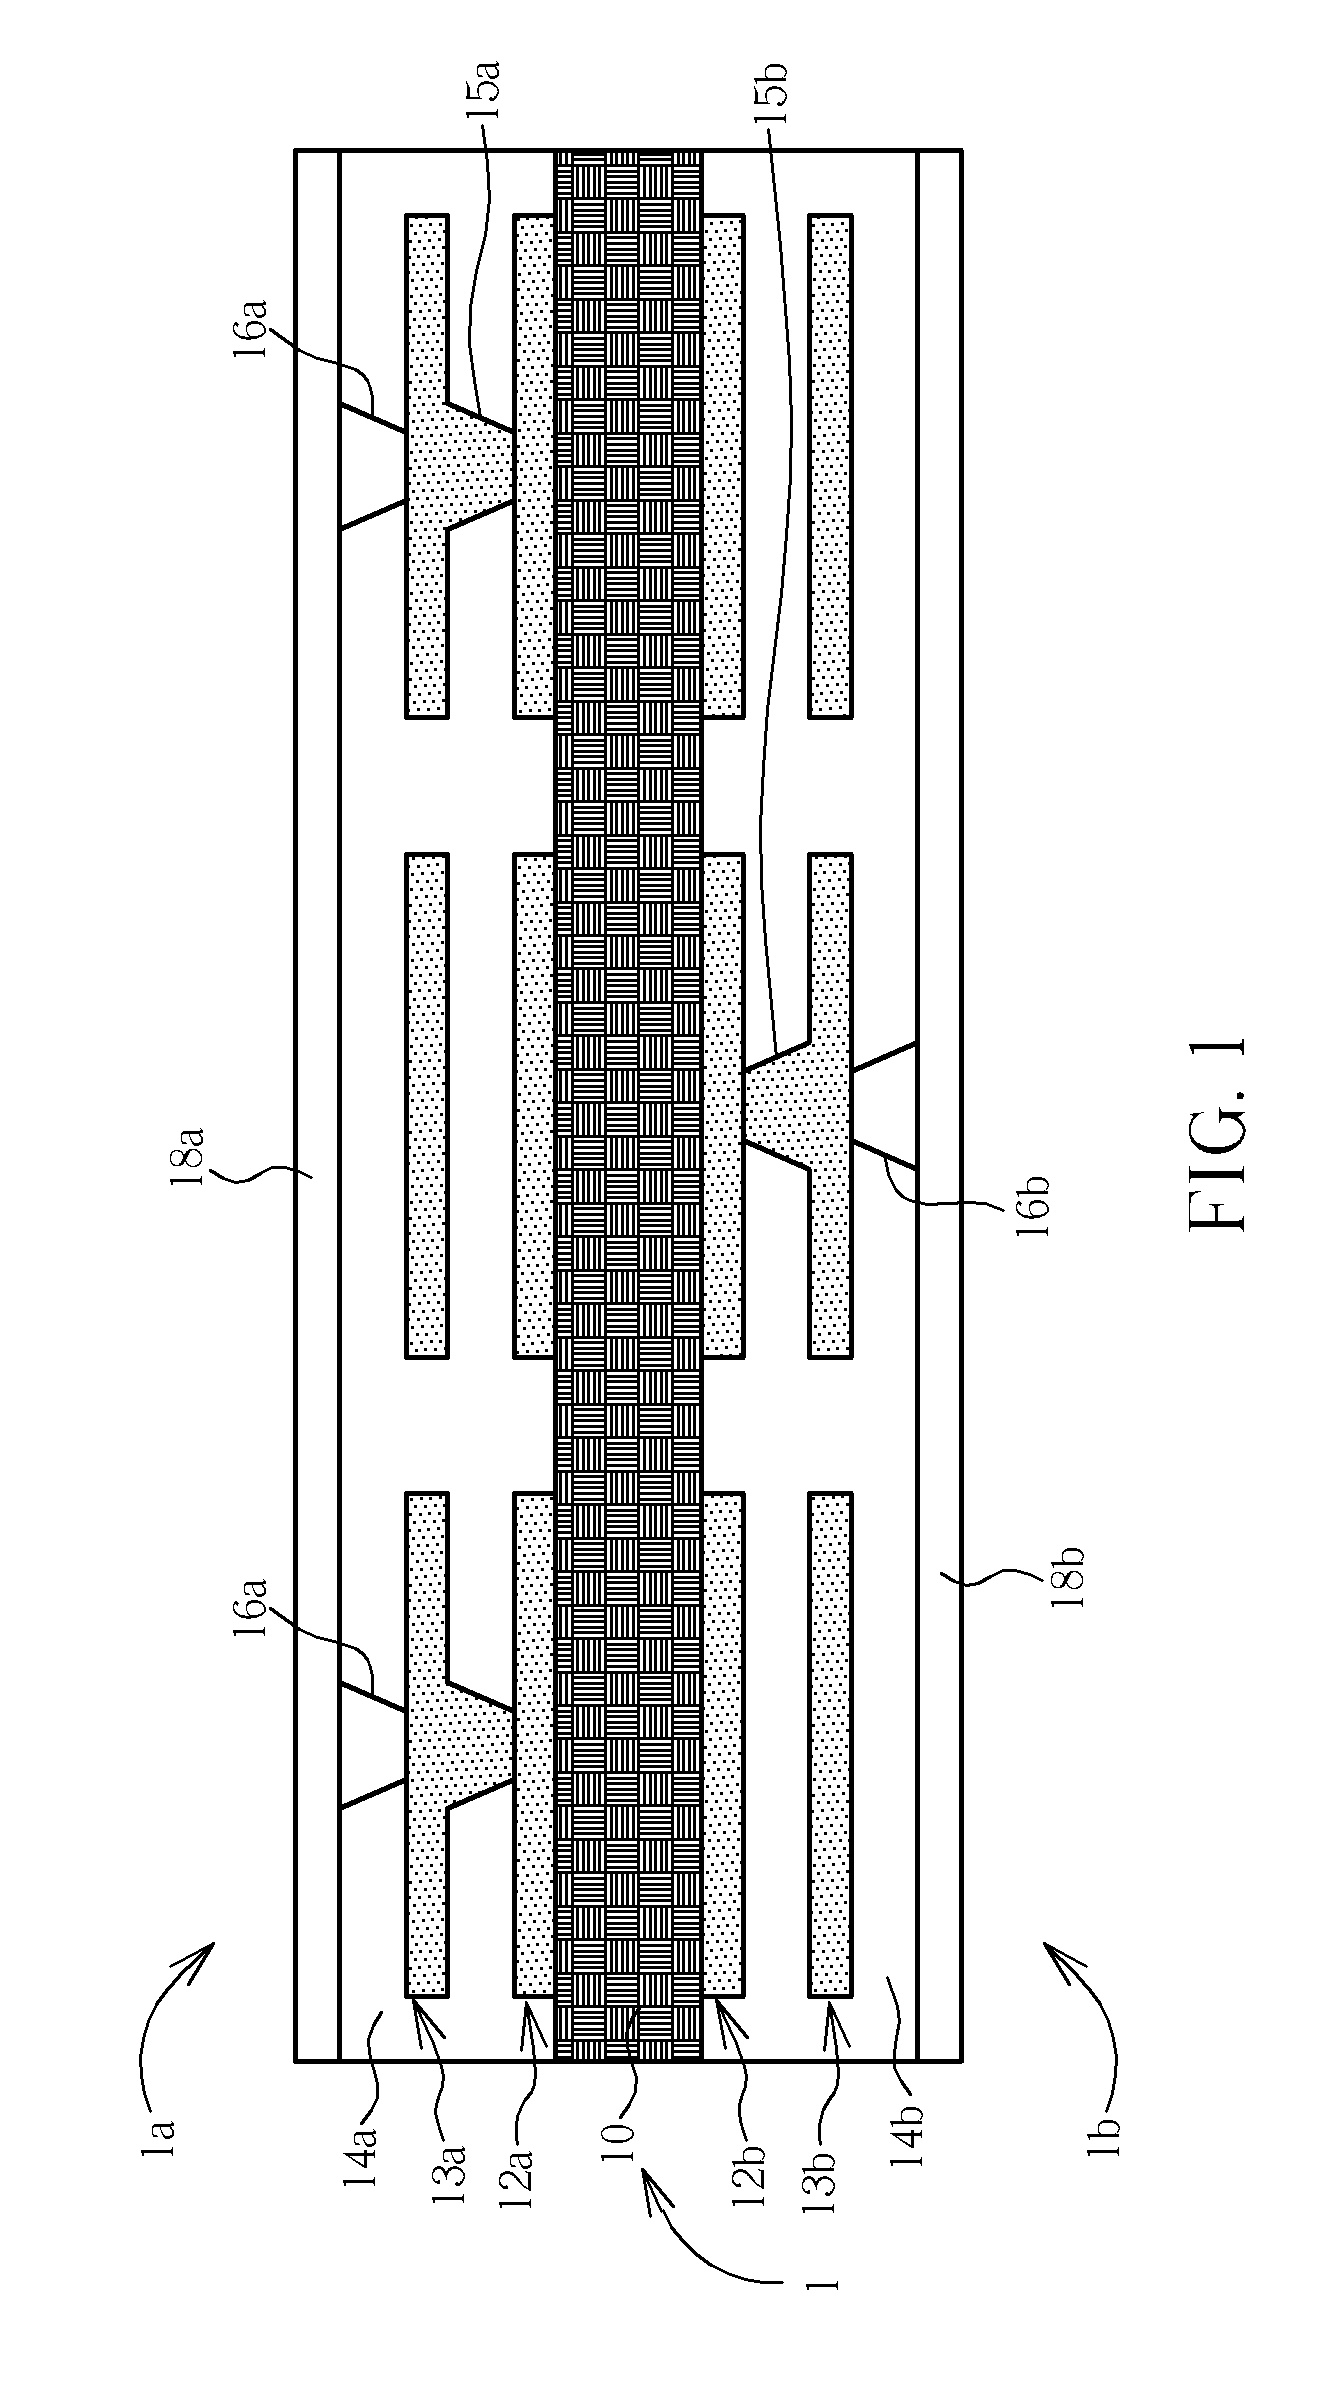 Solder pad and method of making the same